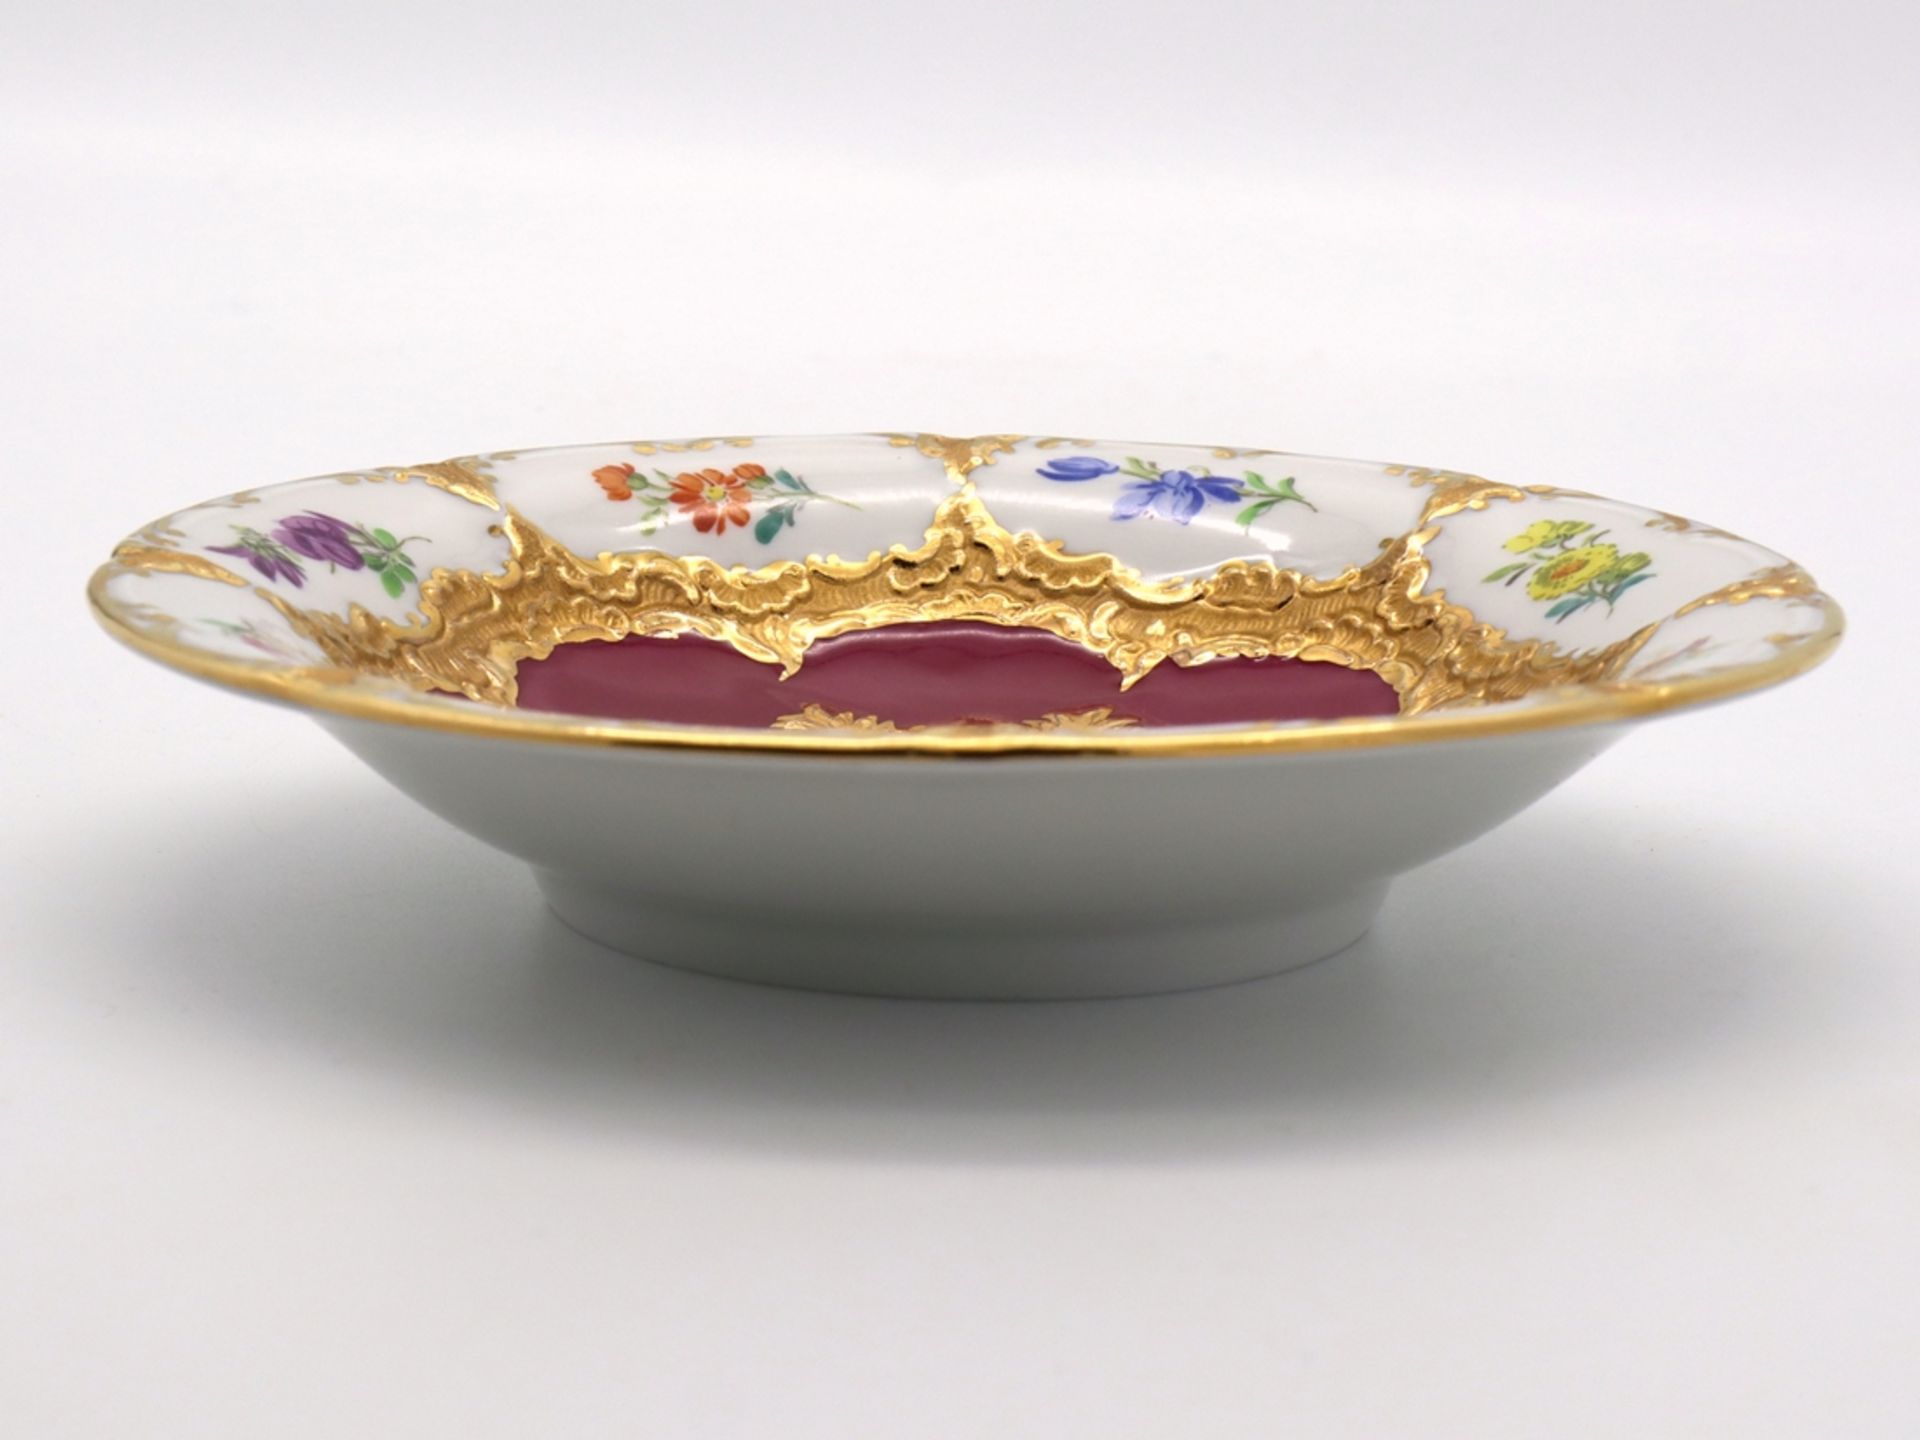 Meissen splendour mocha saucer, B-form 1st choice in noble purple with scattered flowers, after 194 - Image 3 of 4